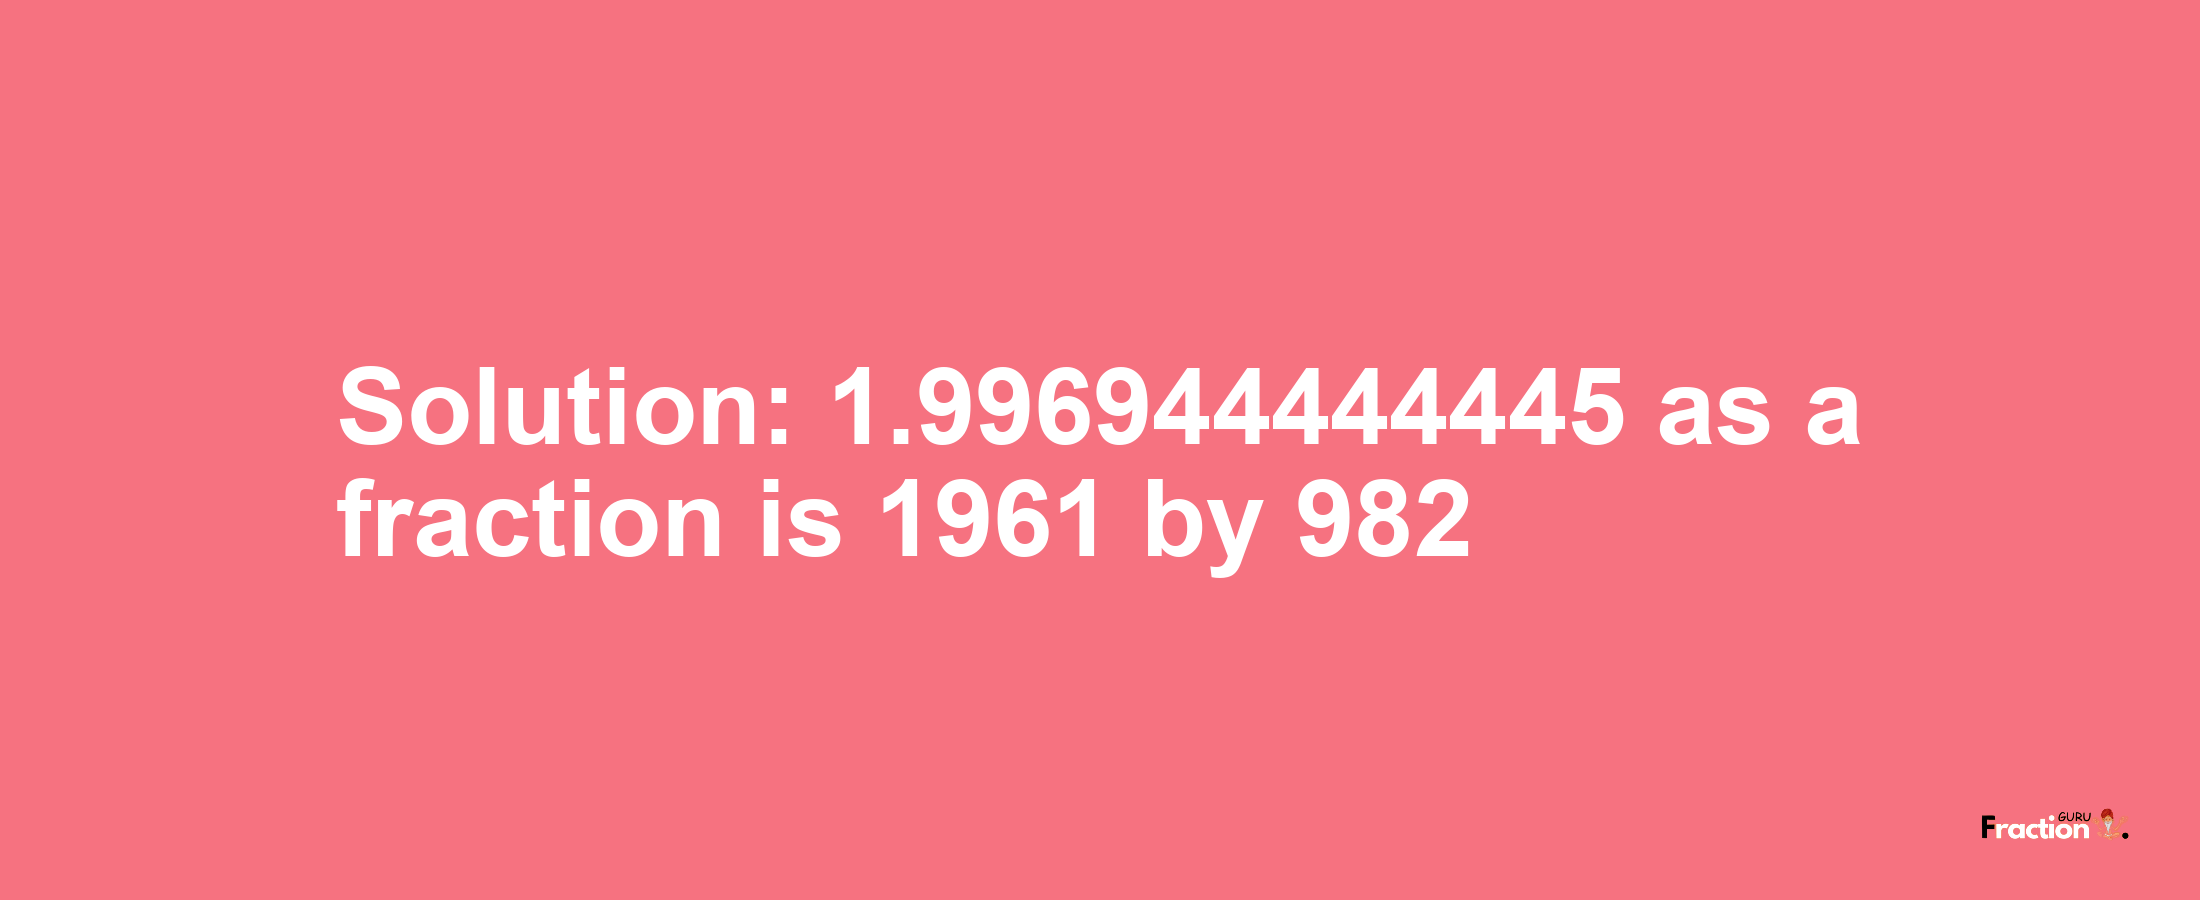 Solution:1.996944444445 as a fraction is 1961/982